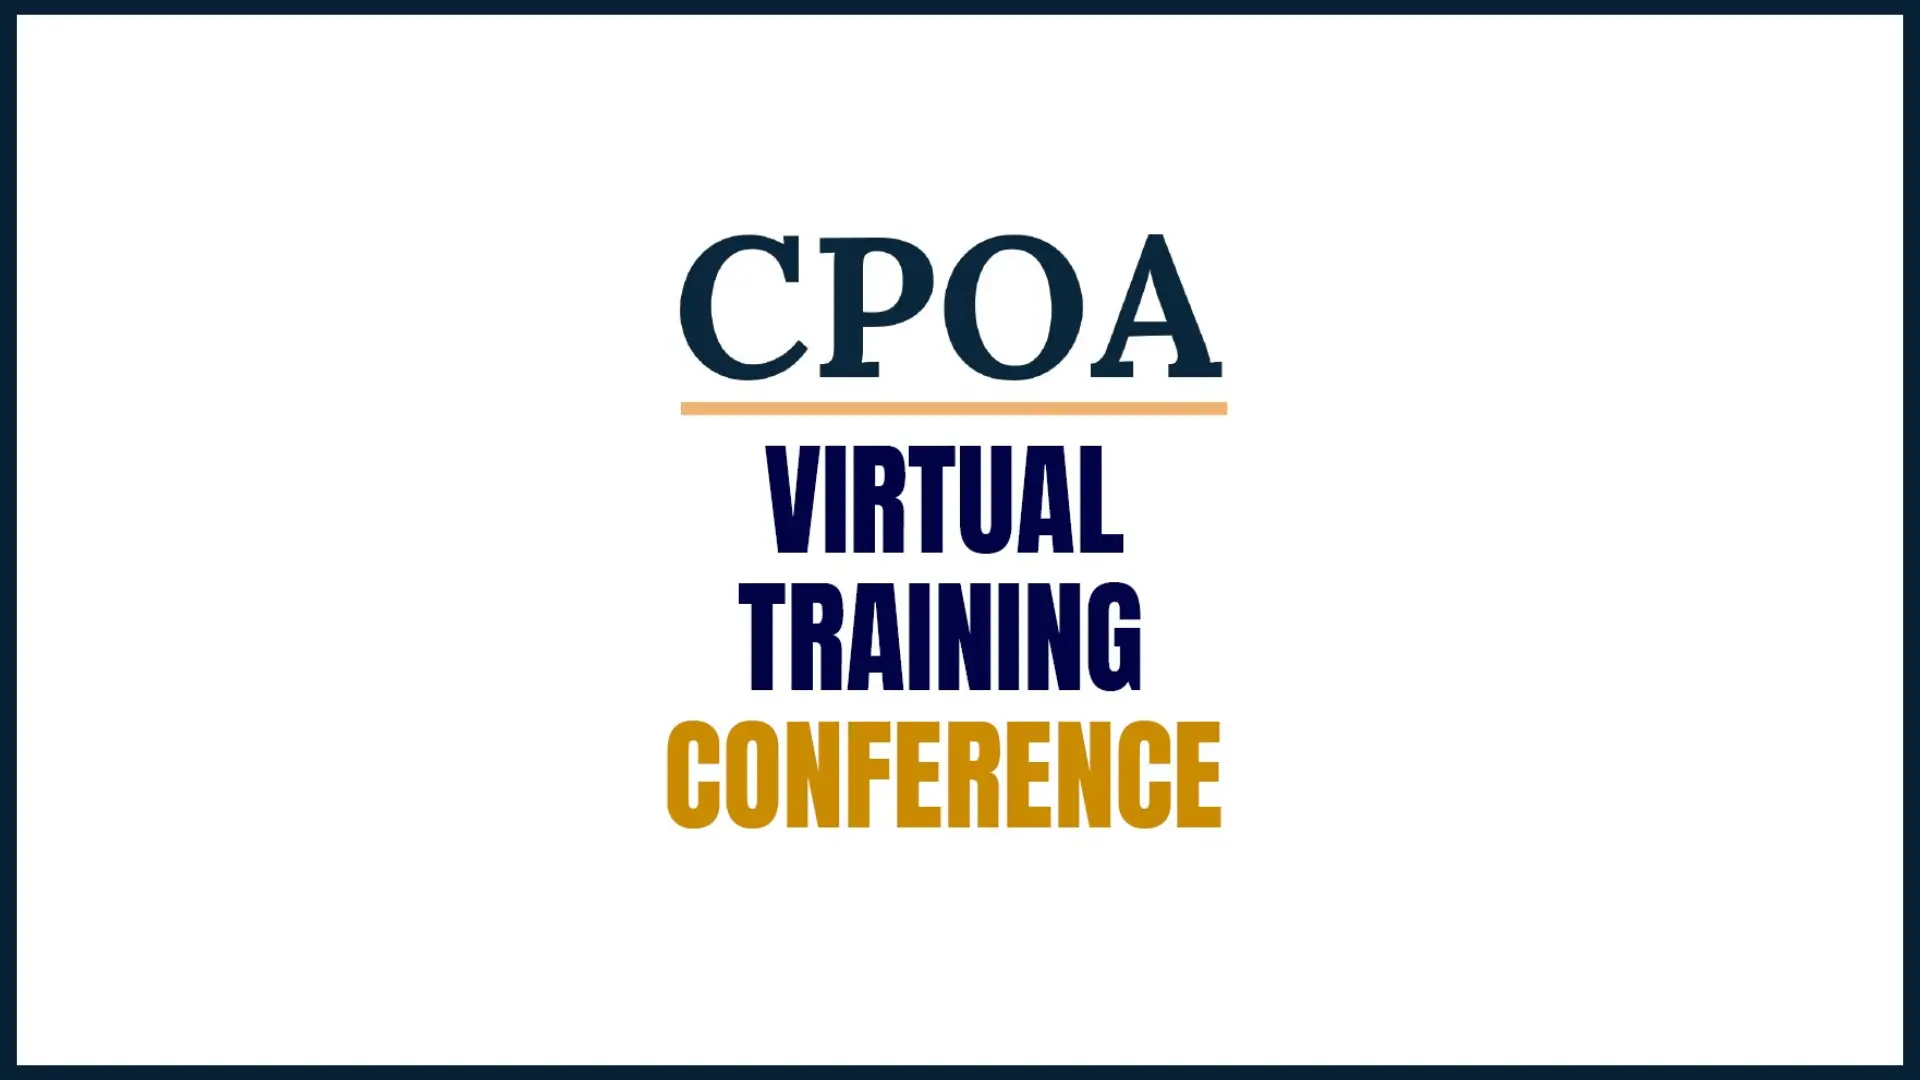 CPOA Virtual Training Conference